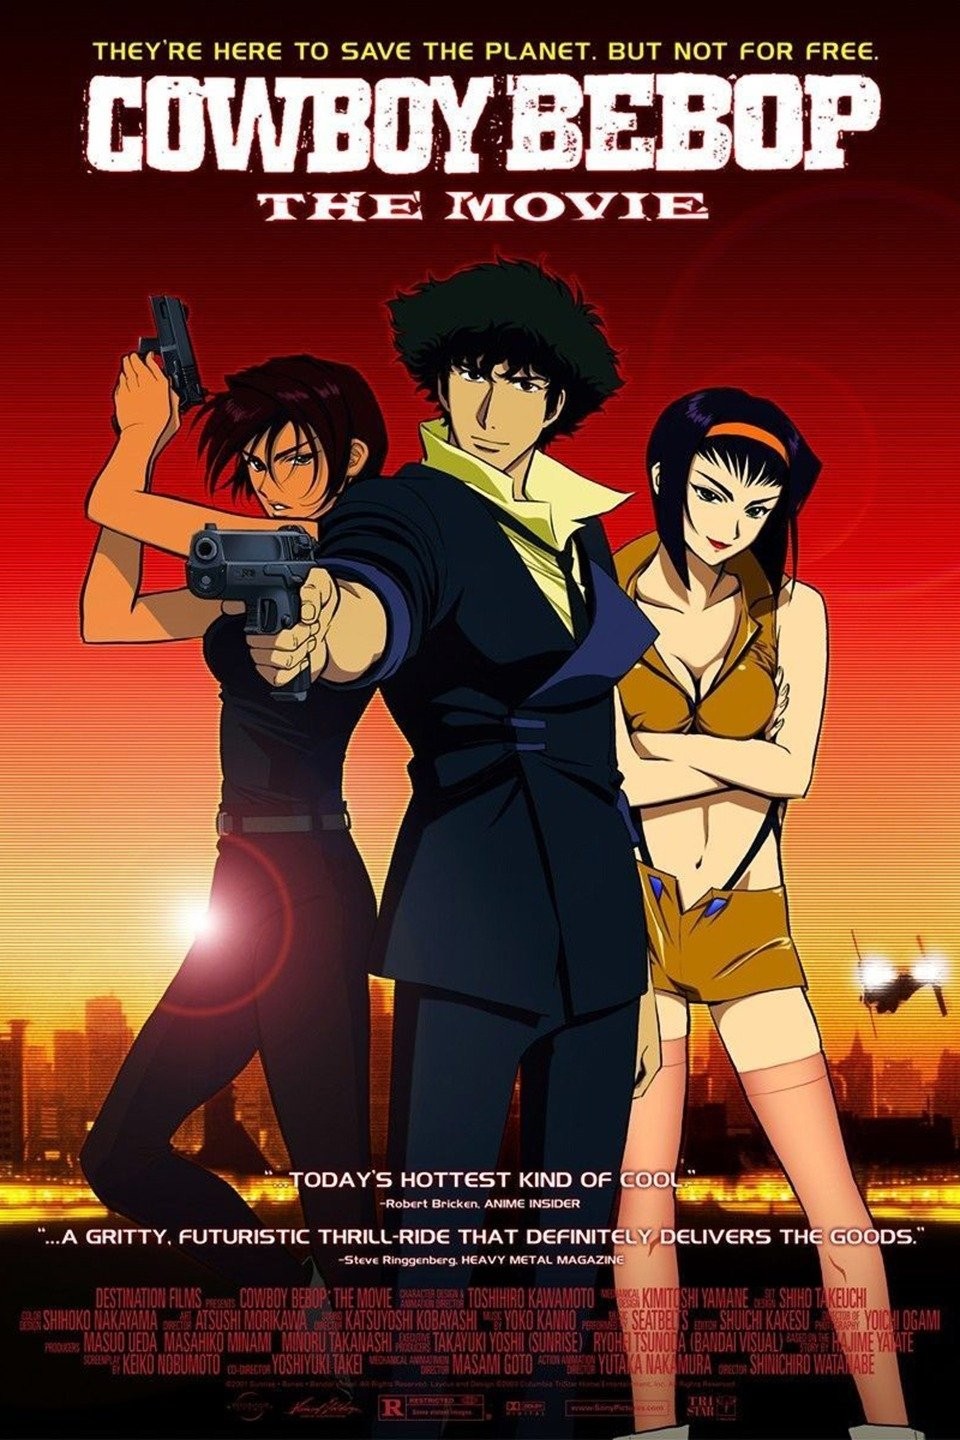 Given Movie - Filme - Animes Online